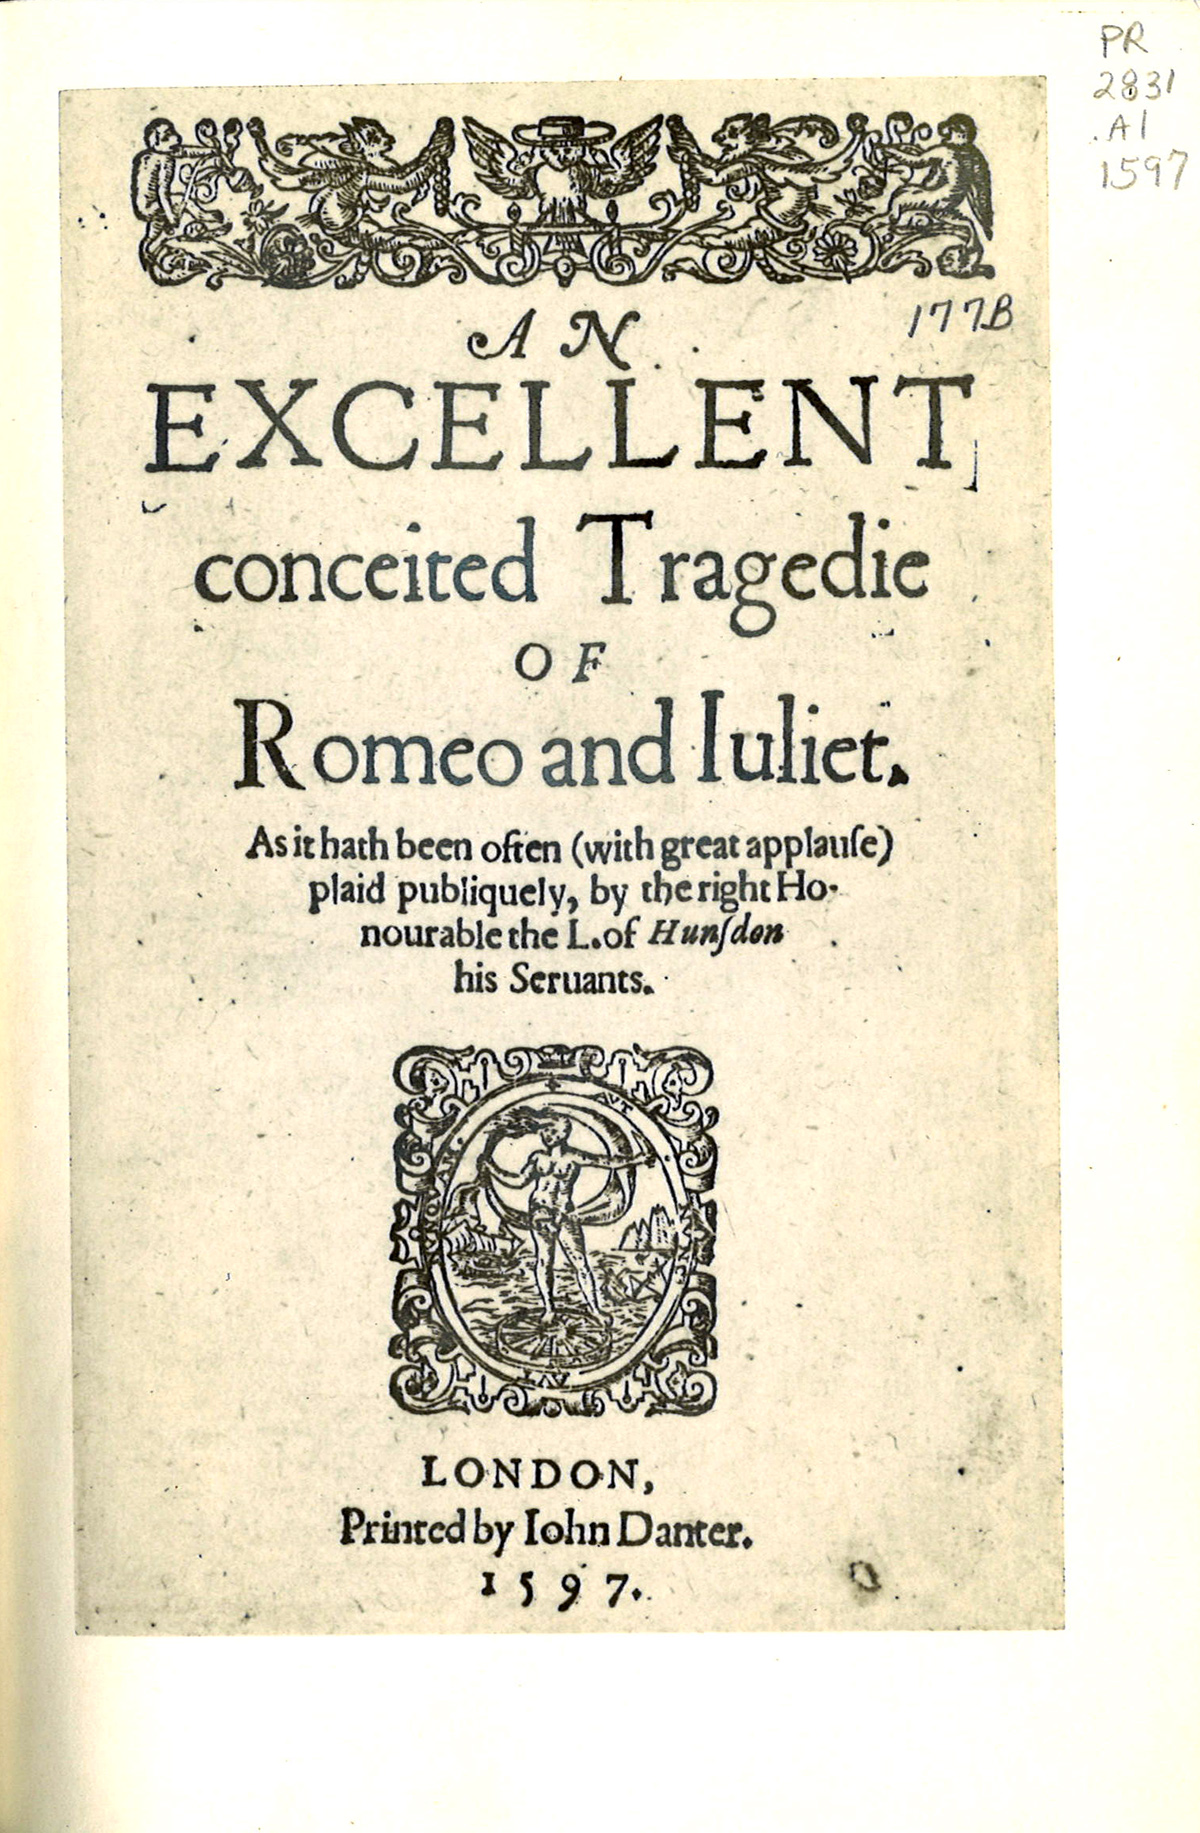 Title page from facsimile of 1597 version of Shakespeare's Romeo and Julie